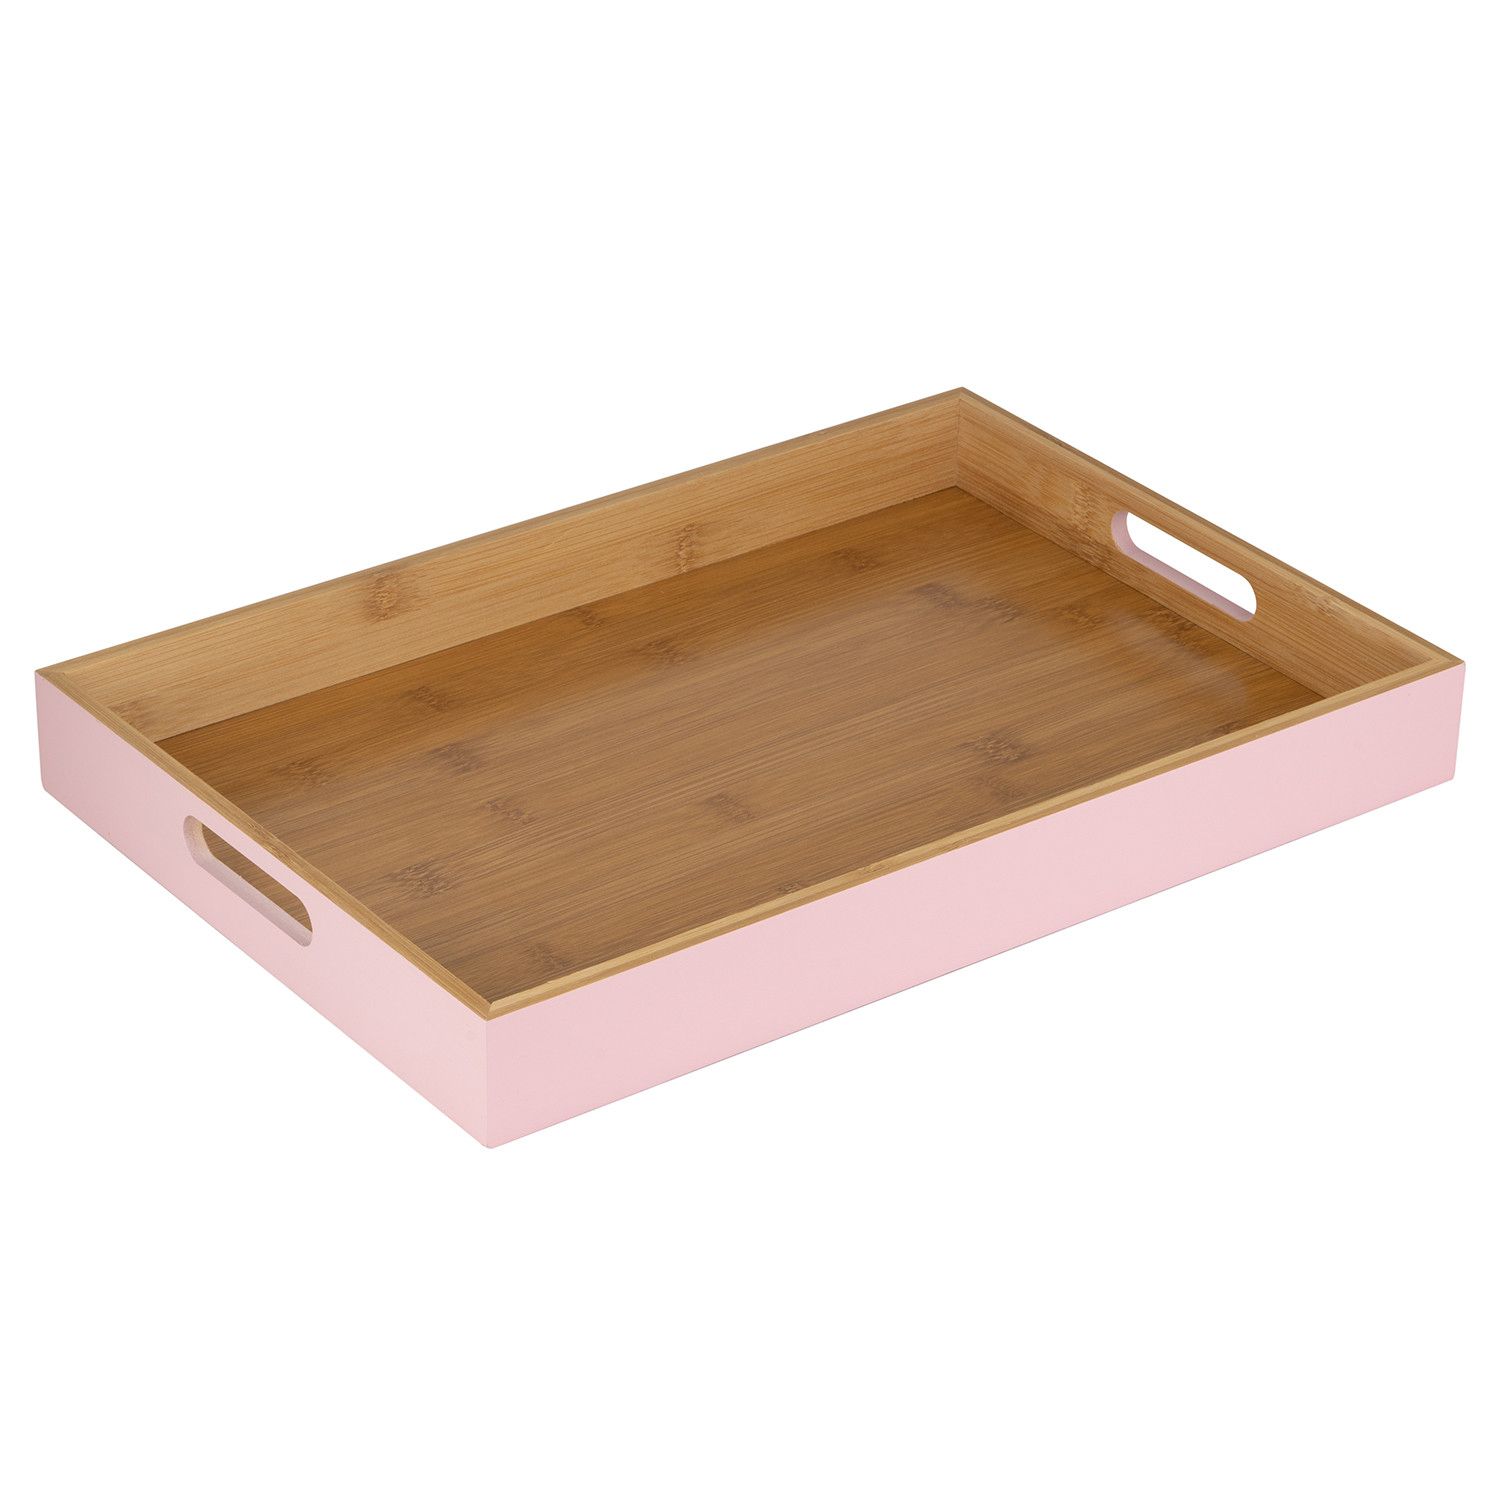 Single Large Colour Border Bamboo Tray in Assorted styles Image 1